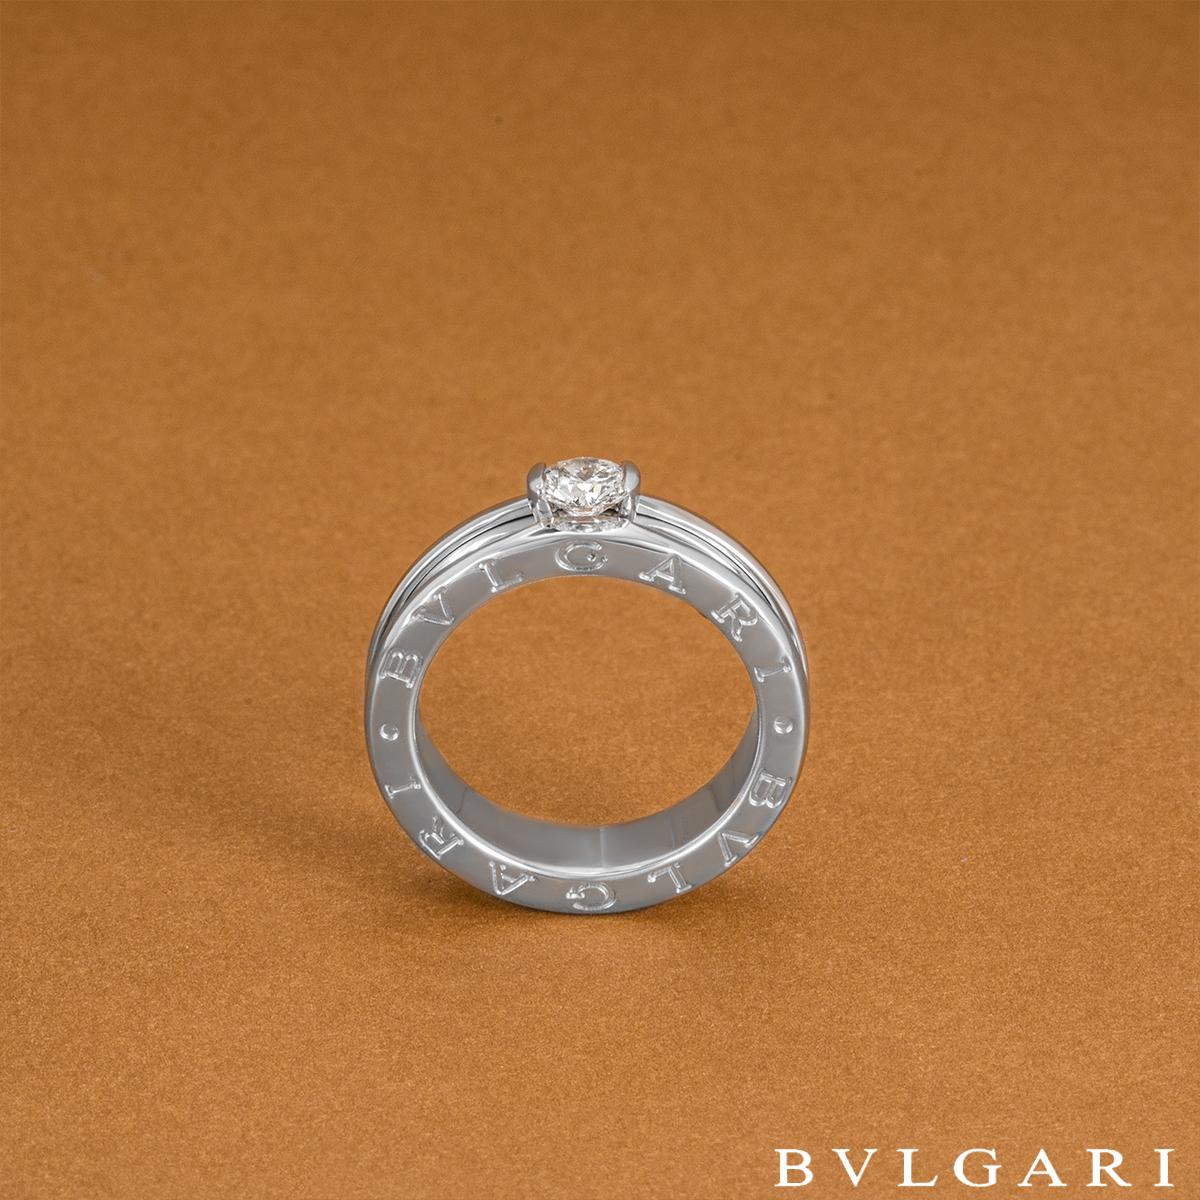 Bvlgari White Gold Diamond B.Zero1 Ring 0.35ct F/IF GIA Certified In Excellent Condition For Sale In London, GB